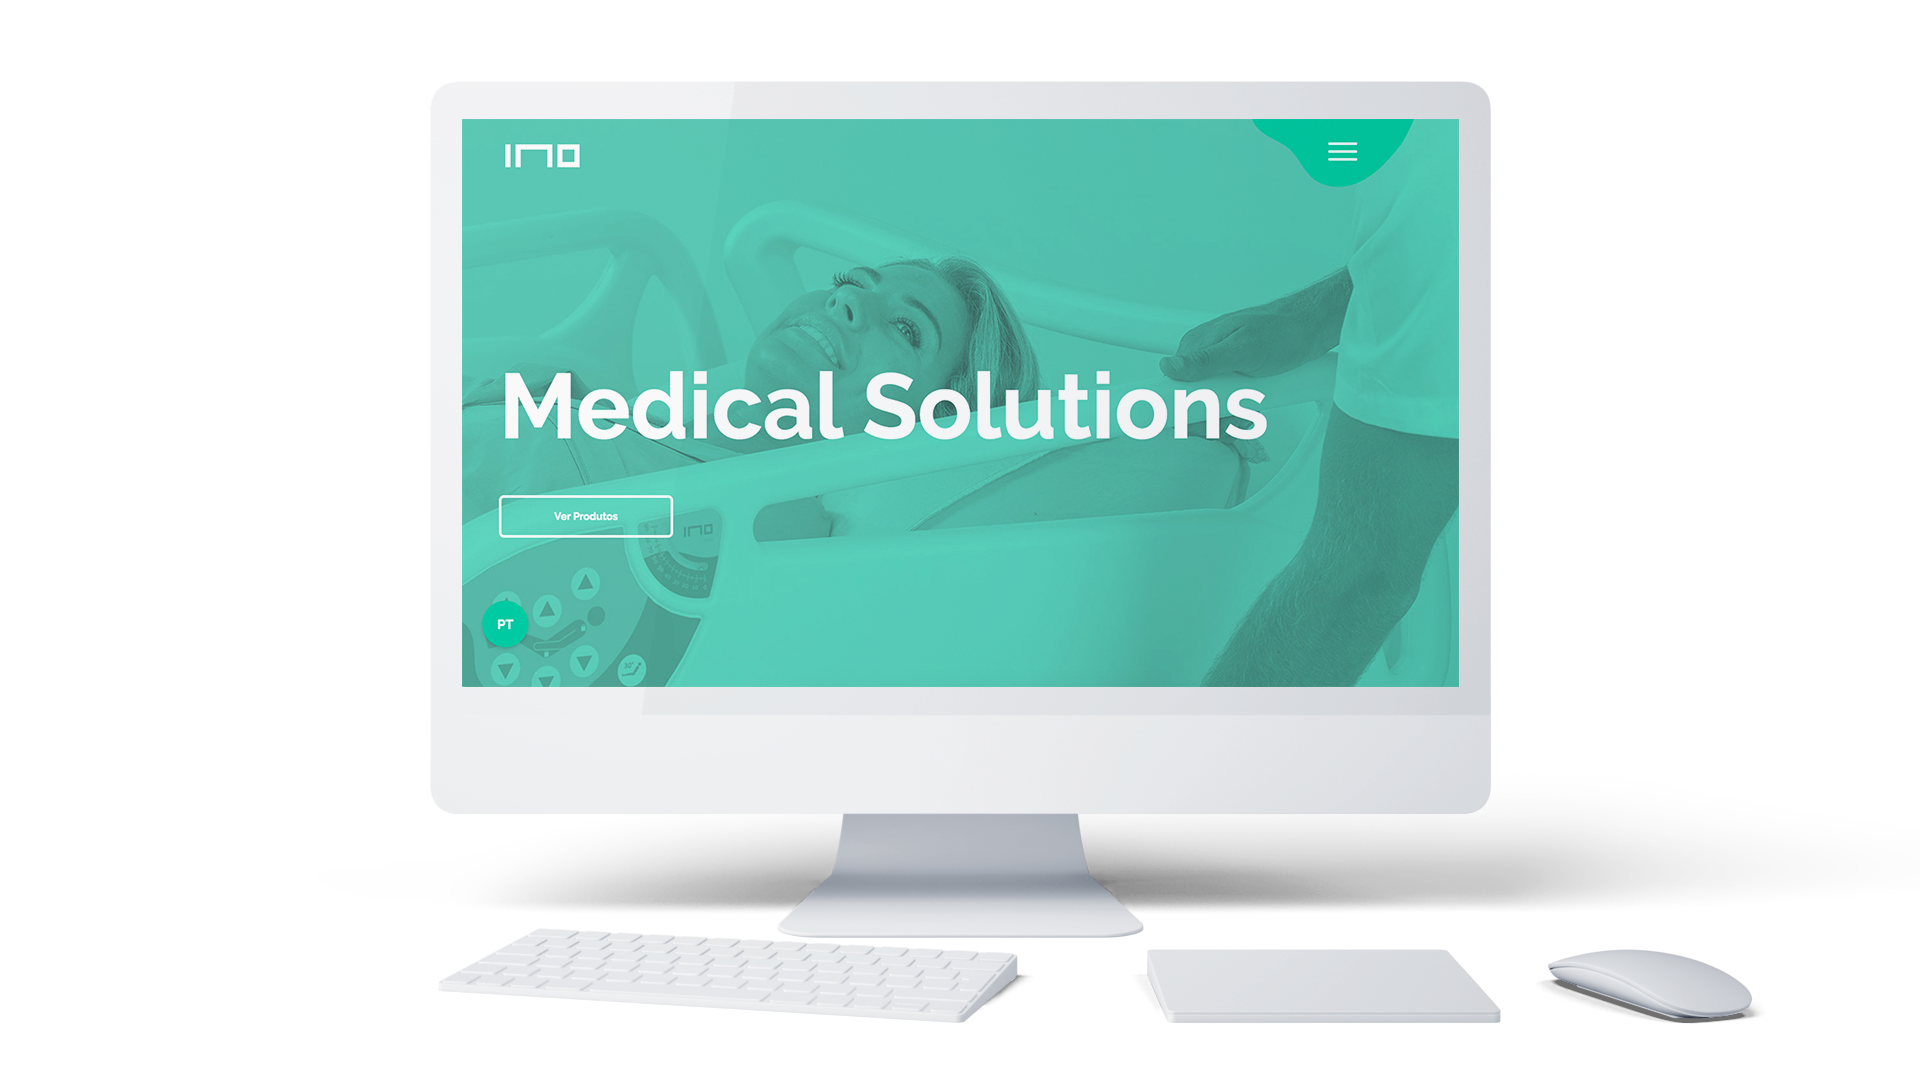 IMO - Medical Solutions